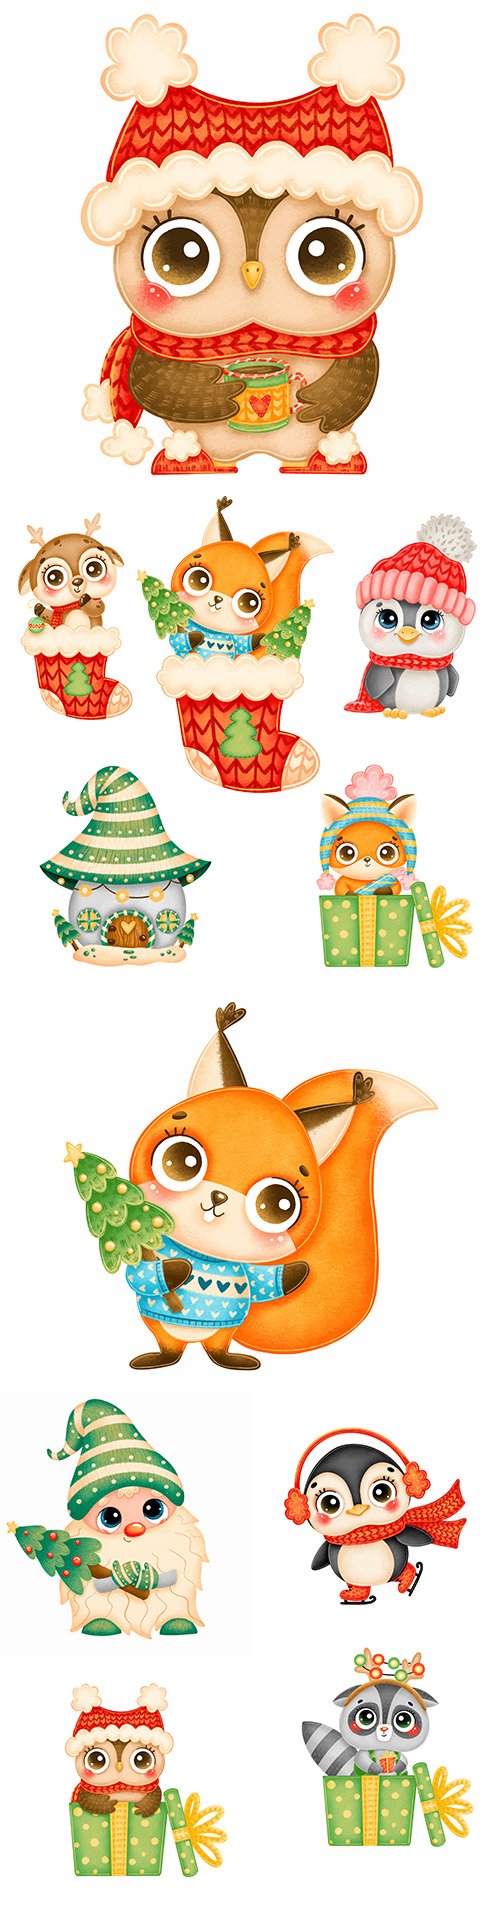 Cute cartoon animals in red hat and scarf Christmas illustrations